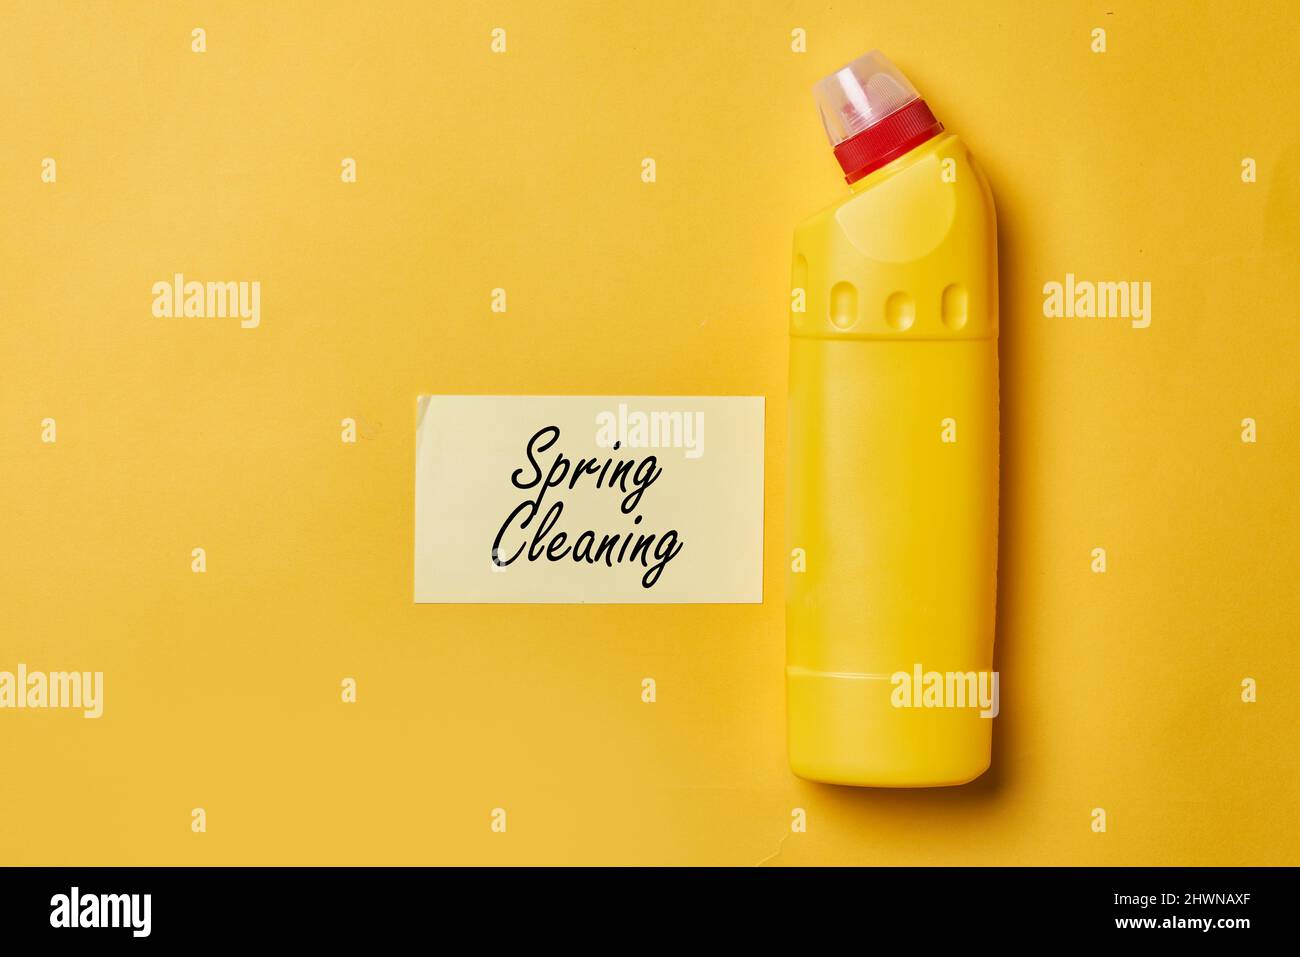 Cleaning service concept. Spring cleaning. Cleaning chemical bottles and supplies. House cleaning concept on colored background Stock Photo